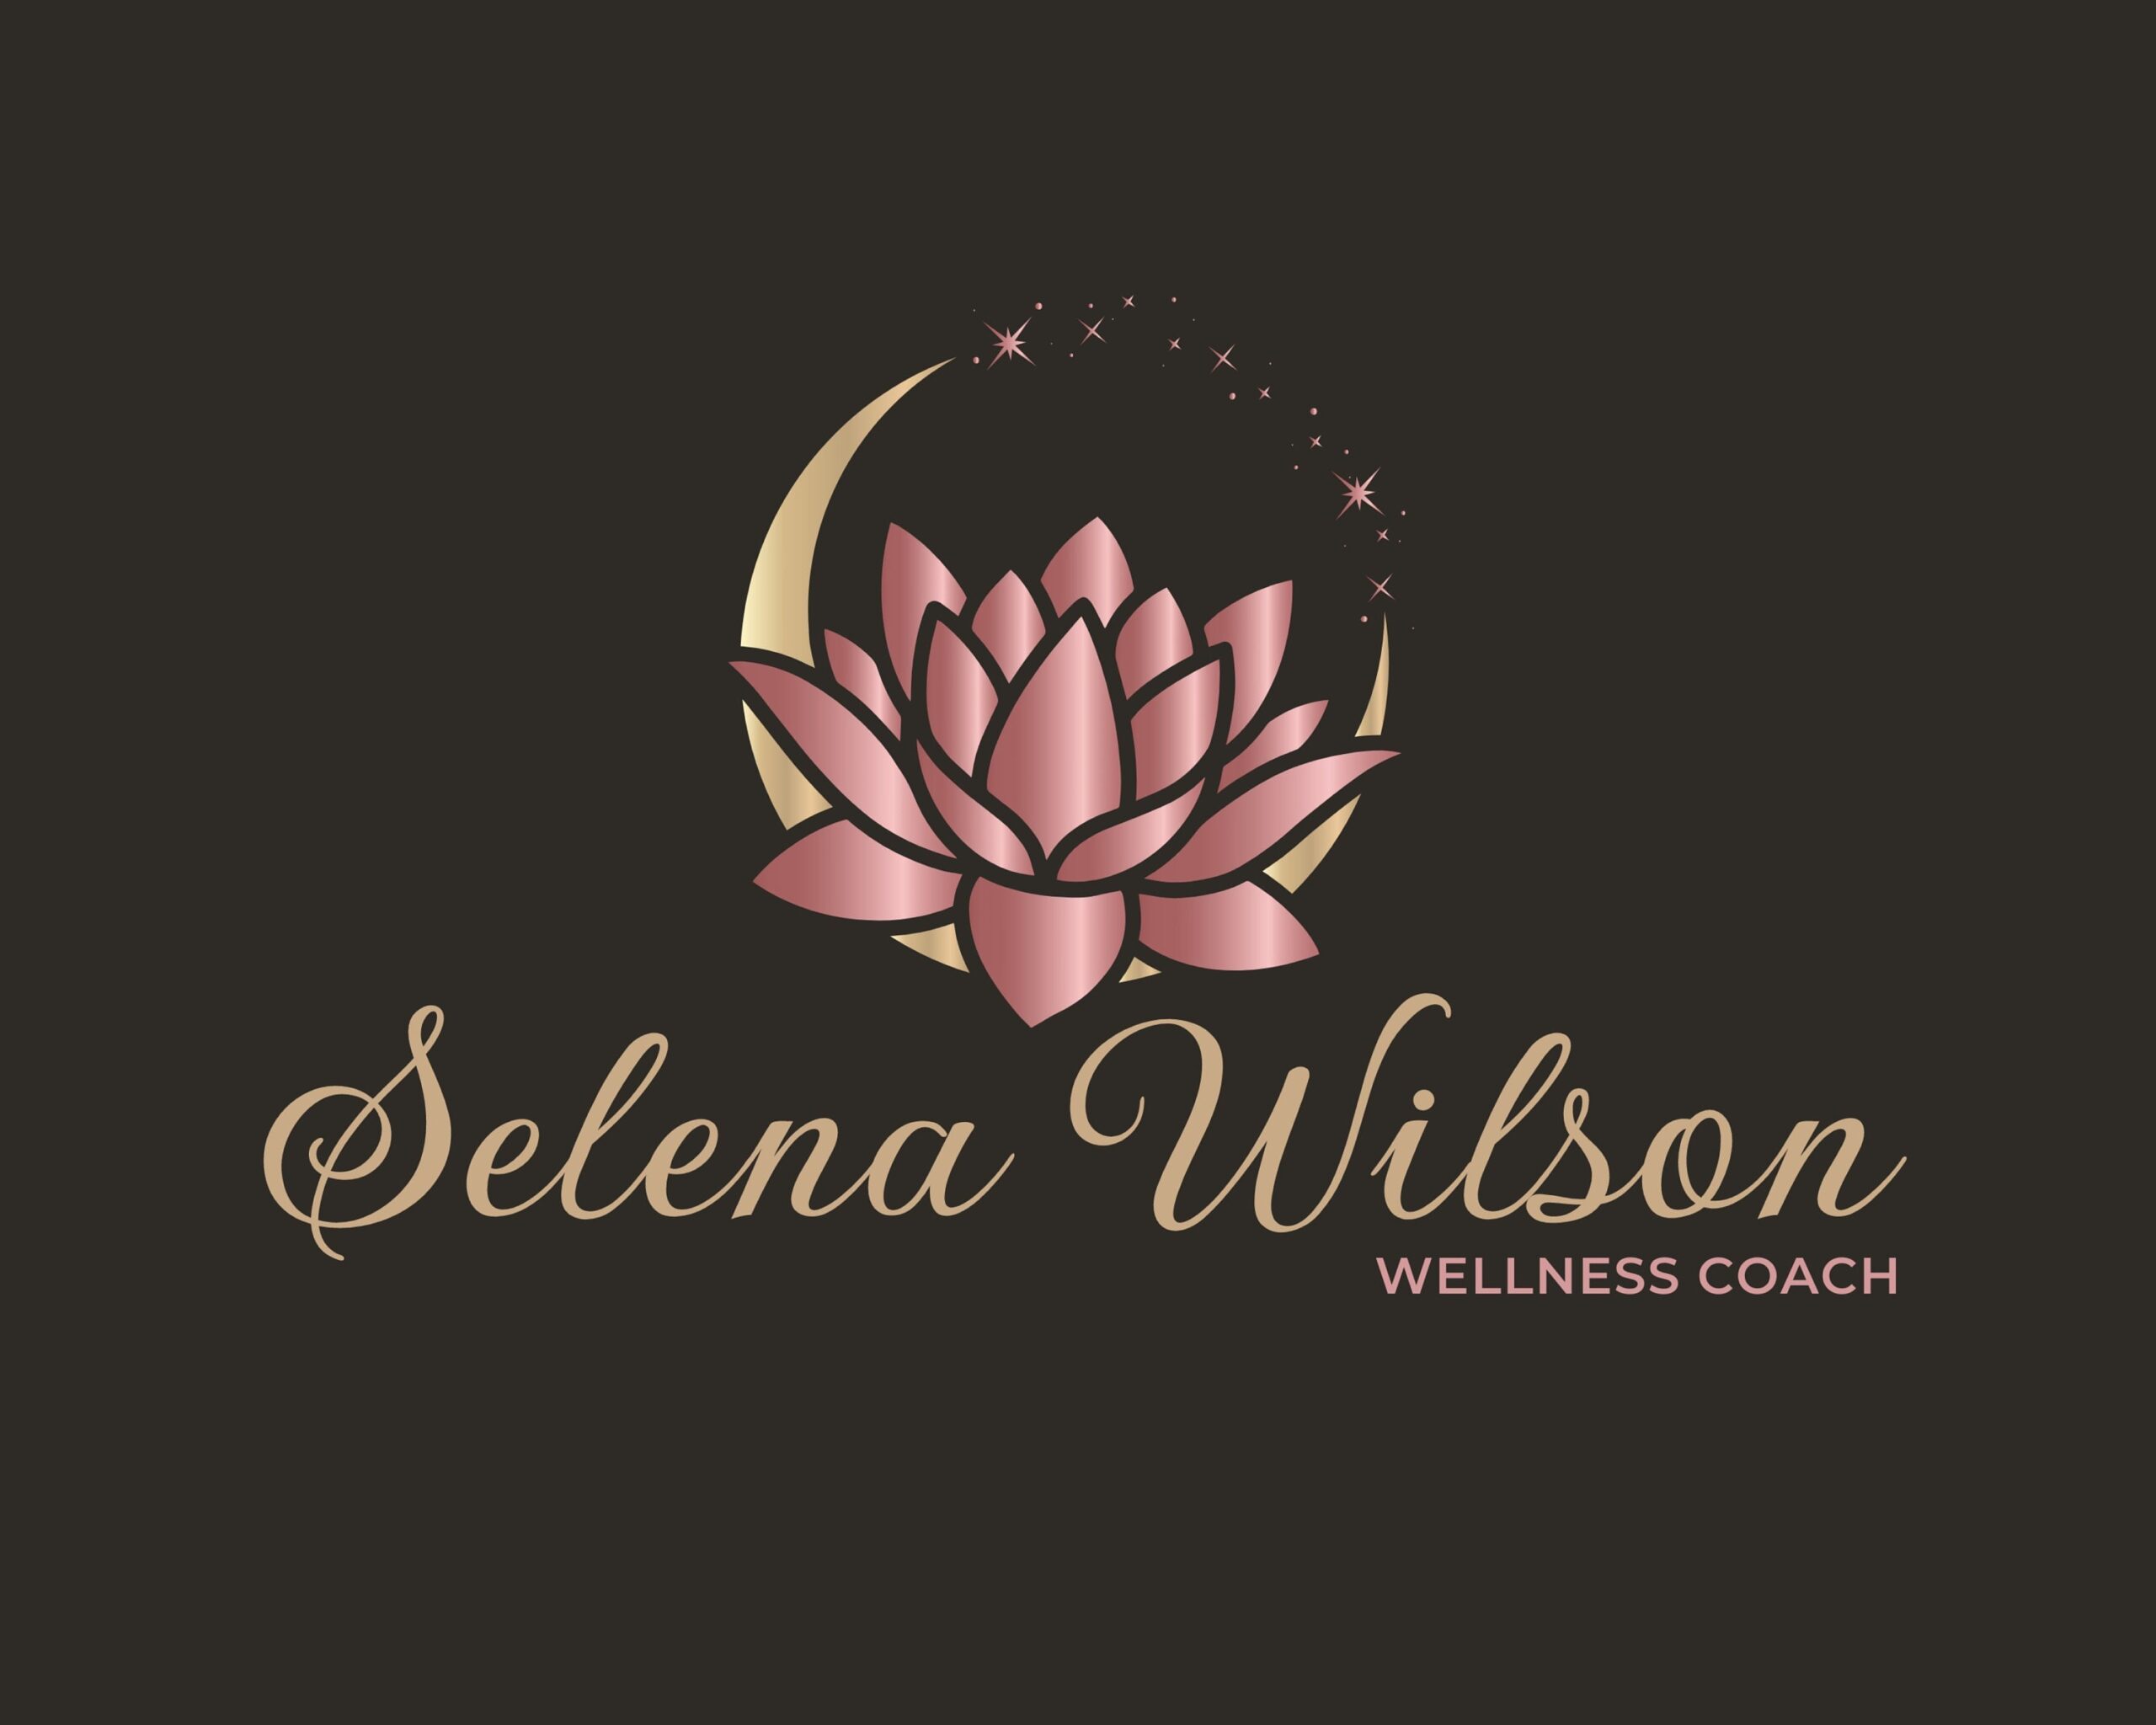 Rose Gold Moon Lotus Flower Premade Logo Design, Spa & Wellness Center, Life Coaching, Psychology Logo - I will customize this logo for you